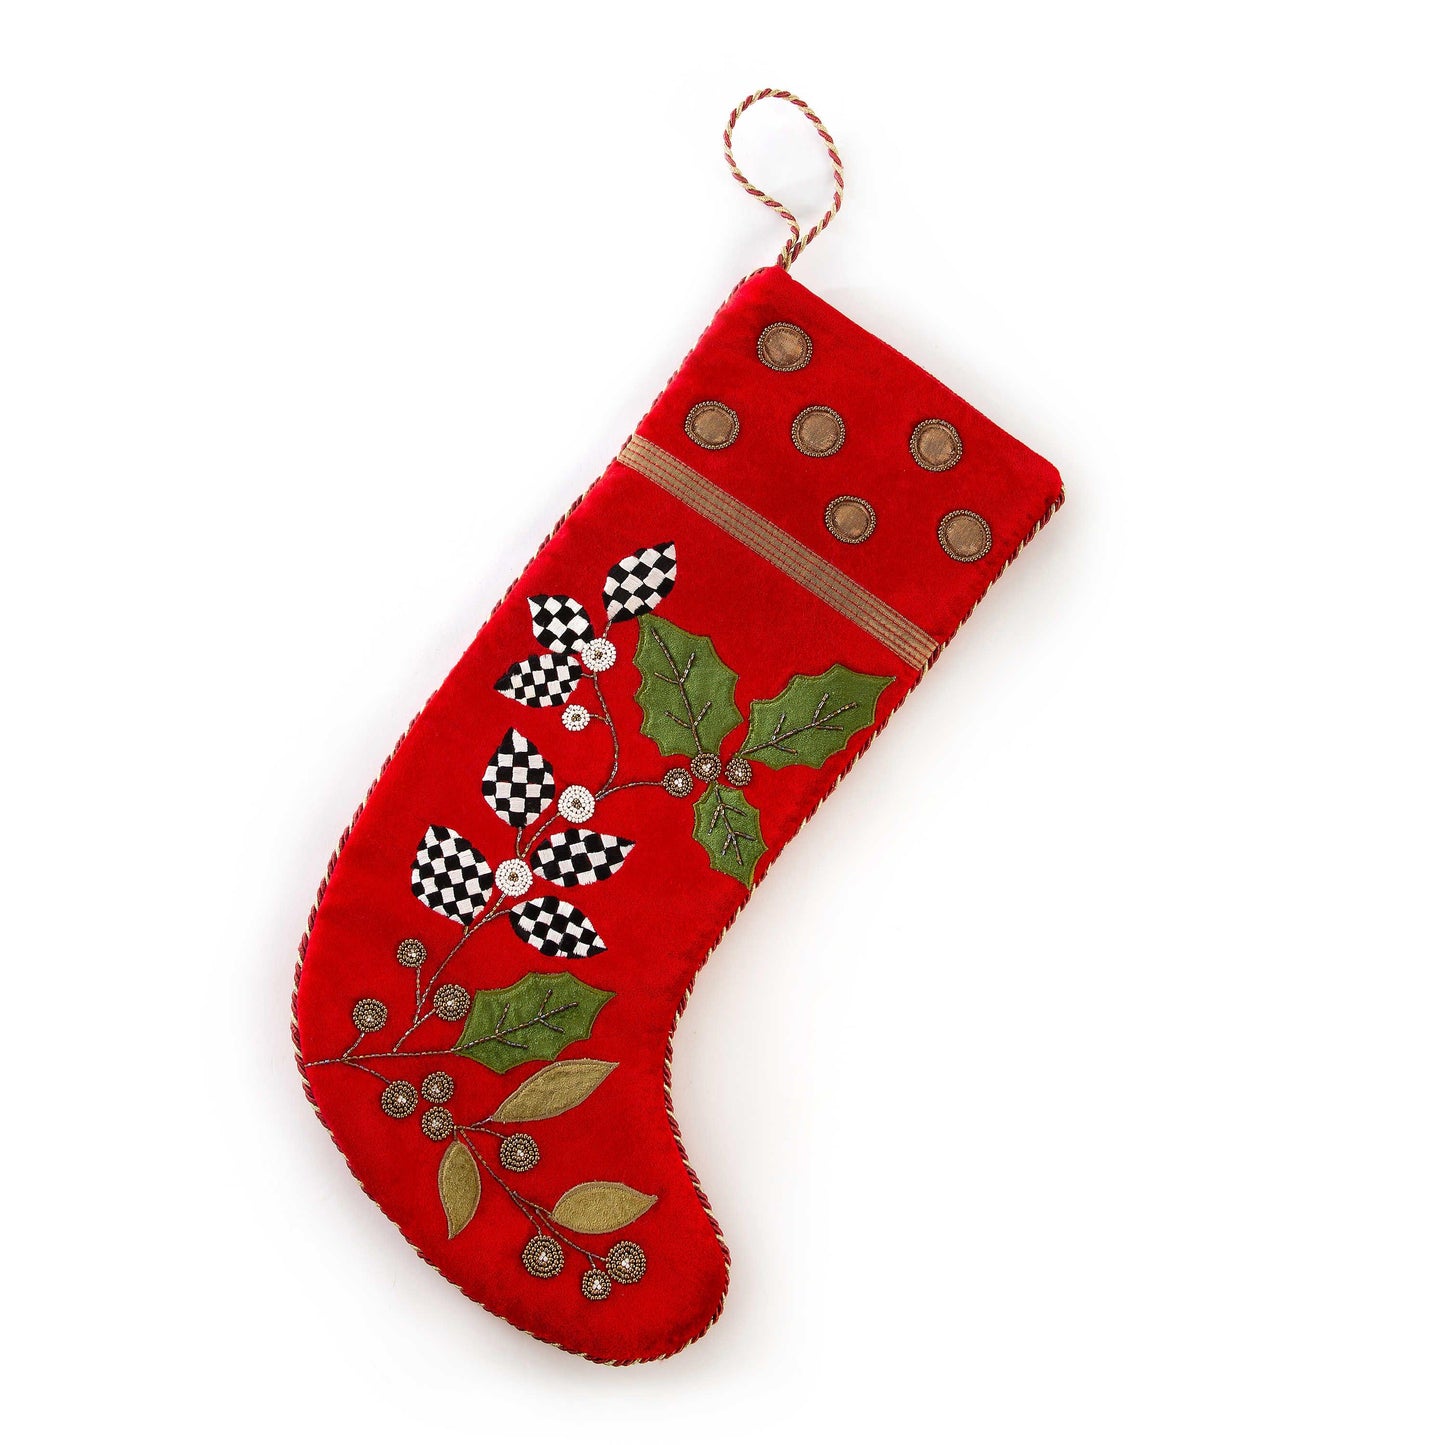 Trailing Holly Stocking (Mackenzie Childs) - Gallery Gifts Online 